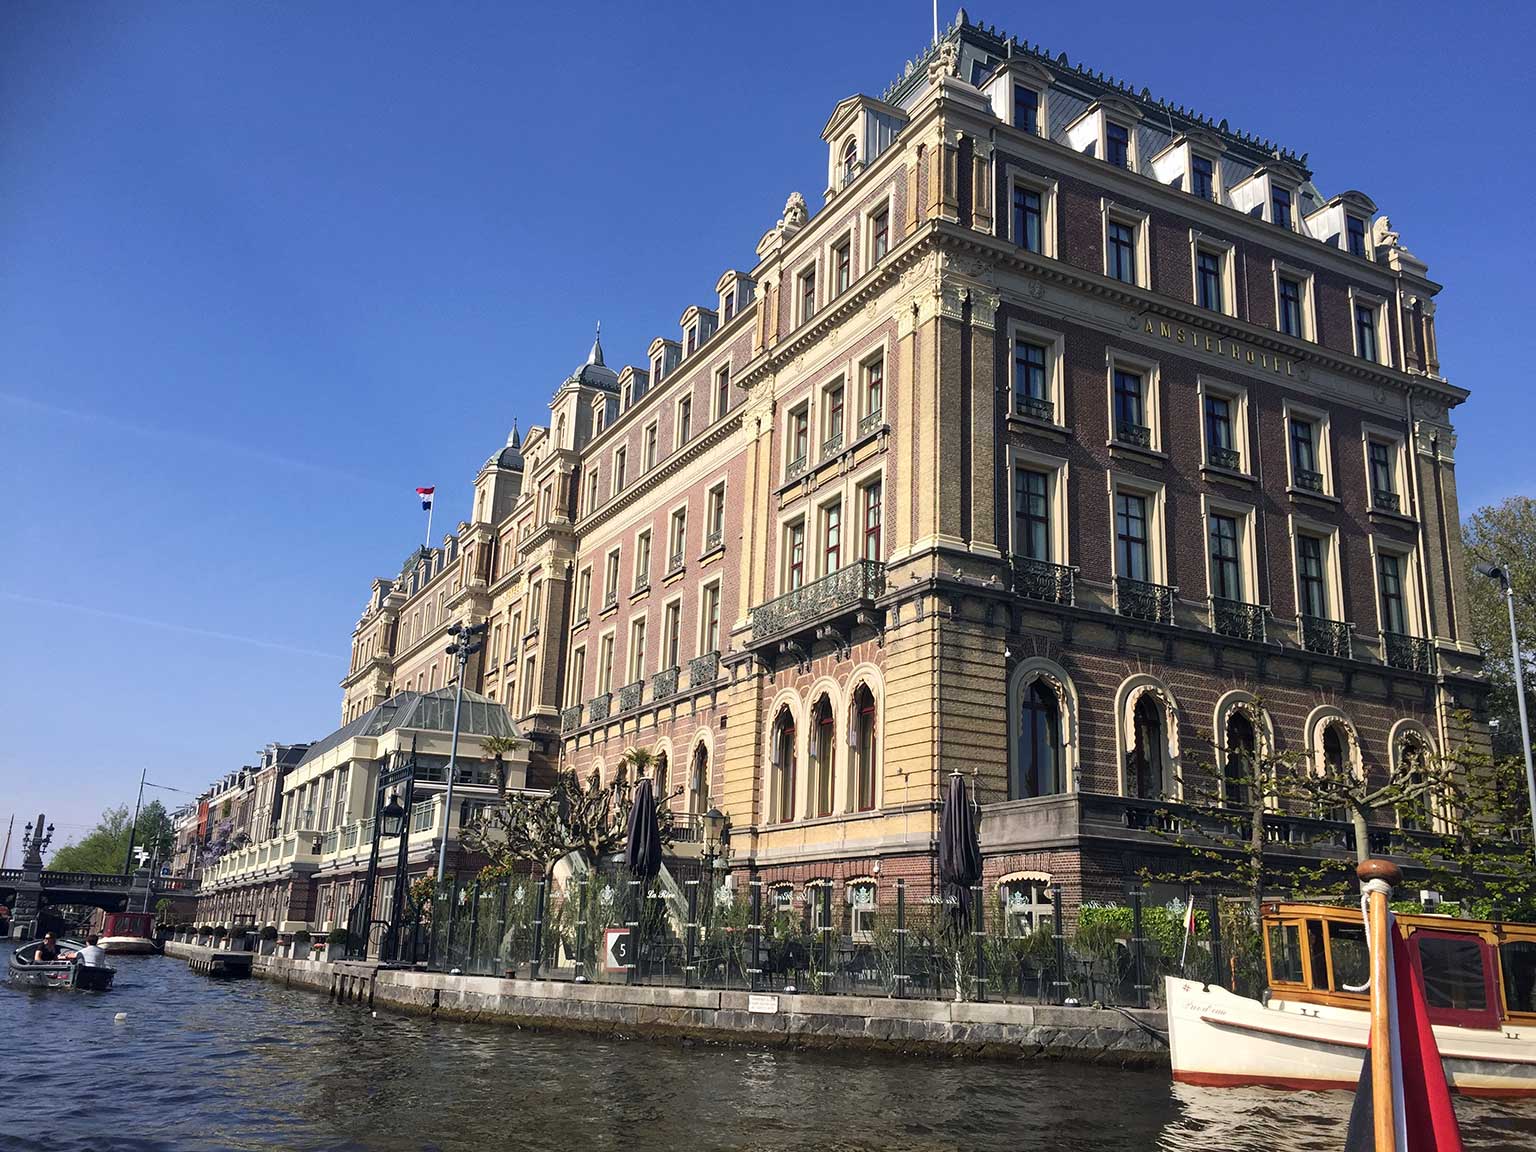 Amstel Hotel, Amsterdam, seen from the water of the Amstel